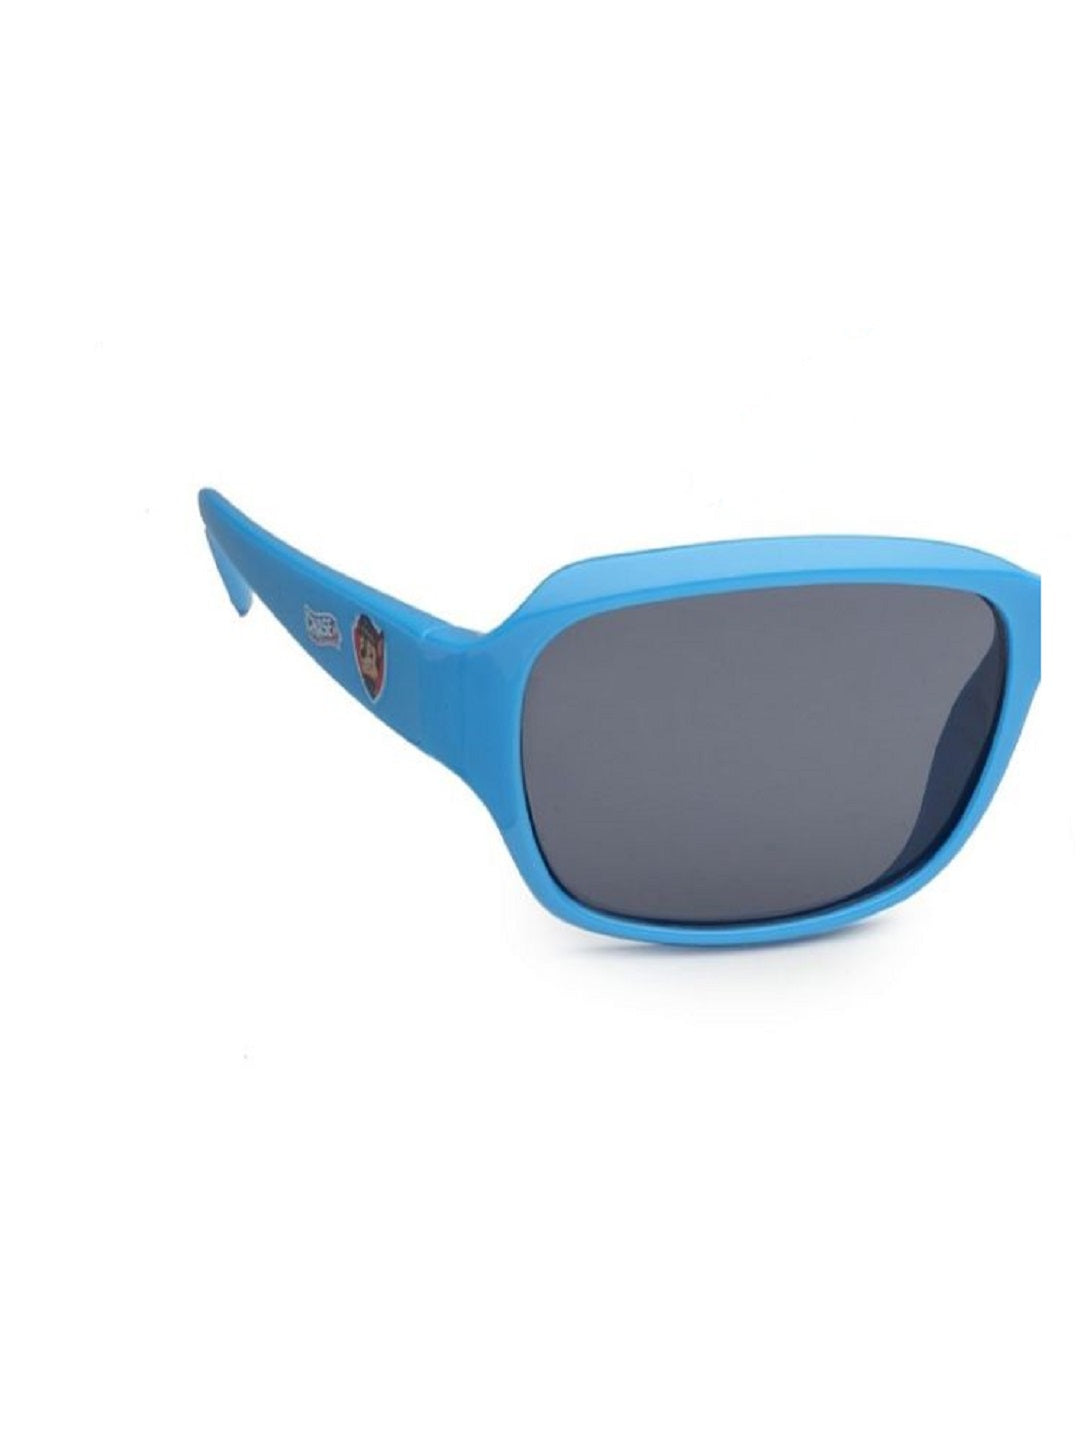 Stol'n Kids Yellow and Blue Bow Applique Rectangular Sunglasses:Yellow and Blue Green and Pink